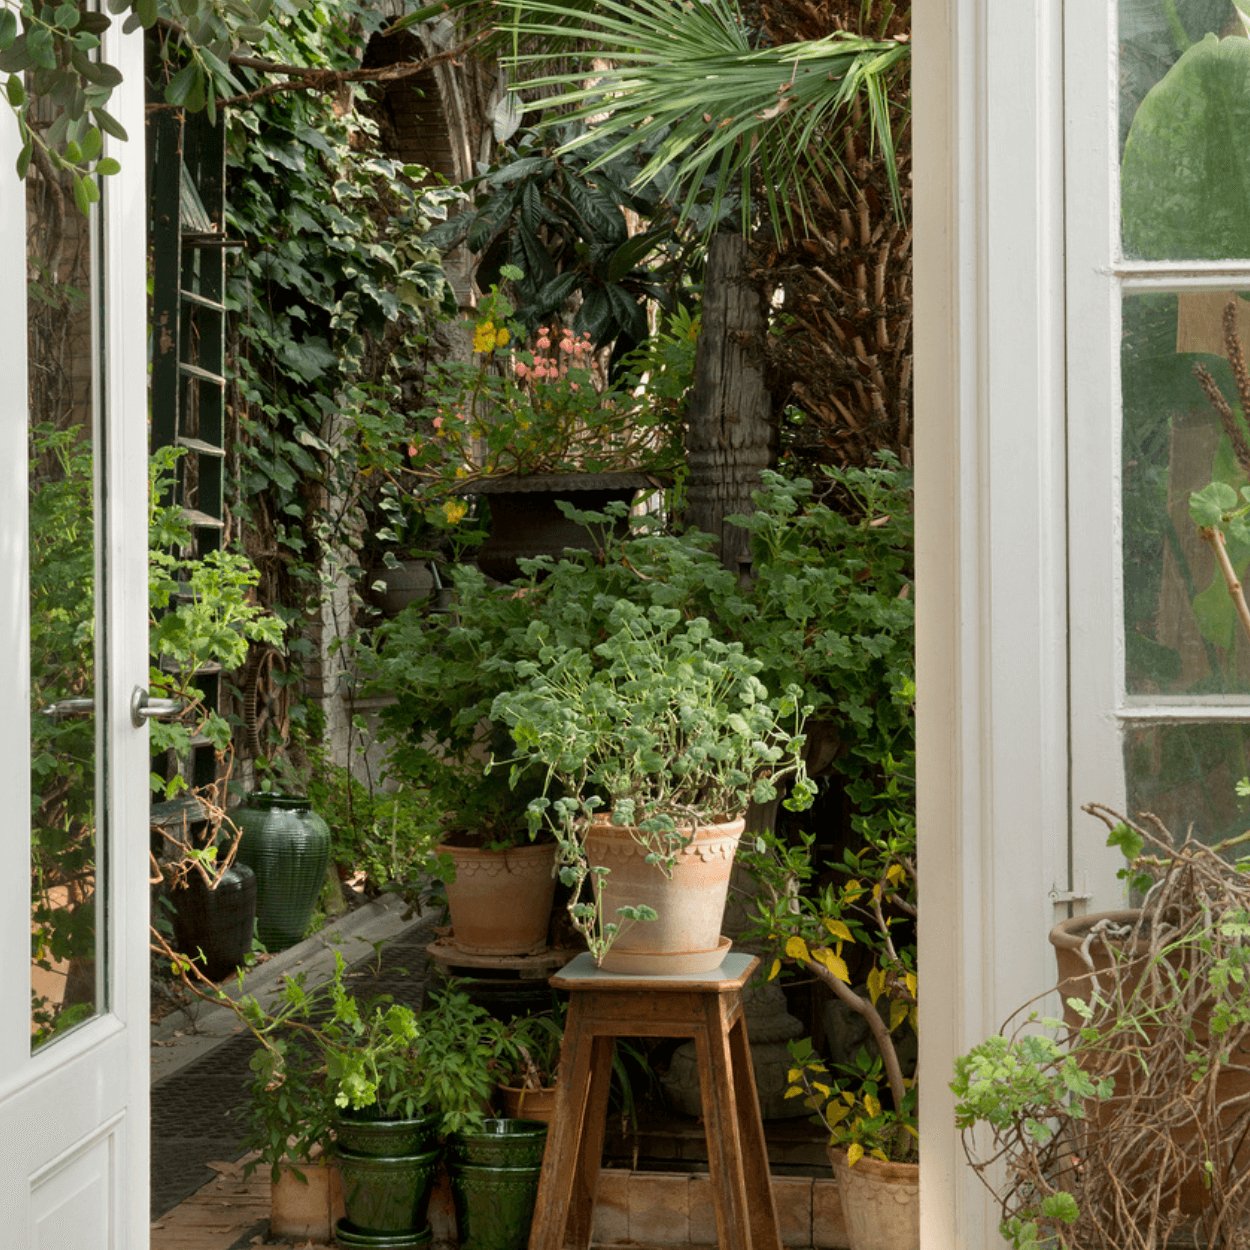 conservatory filled with bergs potter plant pots and heavily covered with flowers and shrubs